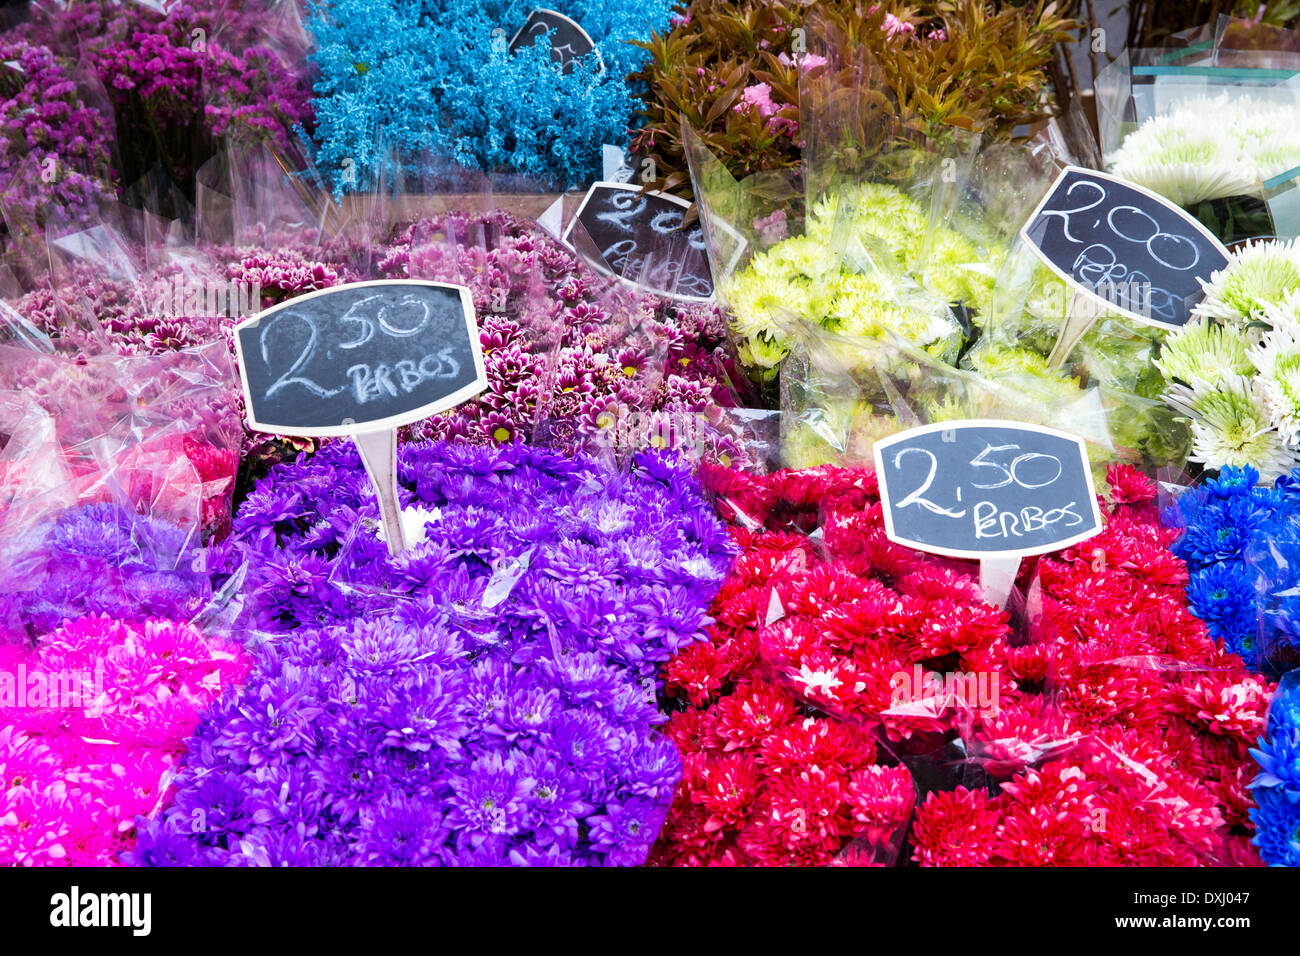 Bunches of flowers at the Albert Cuypmarkt in Amsterdam Stock Photo